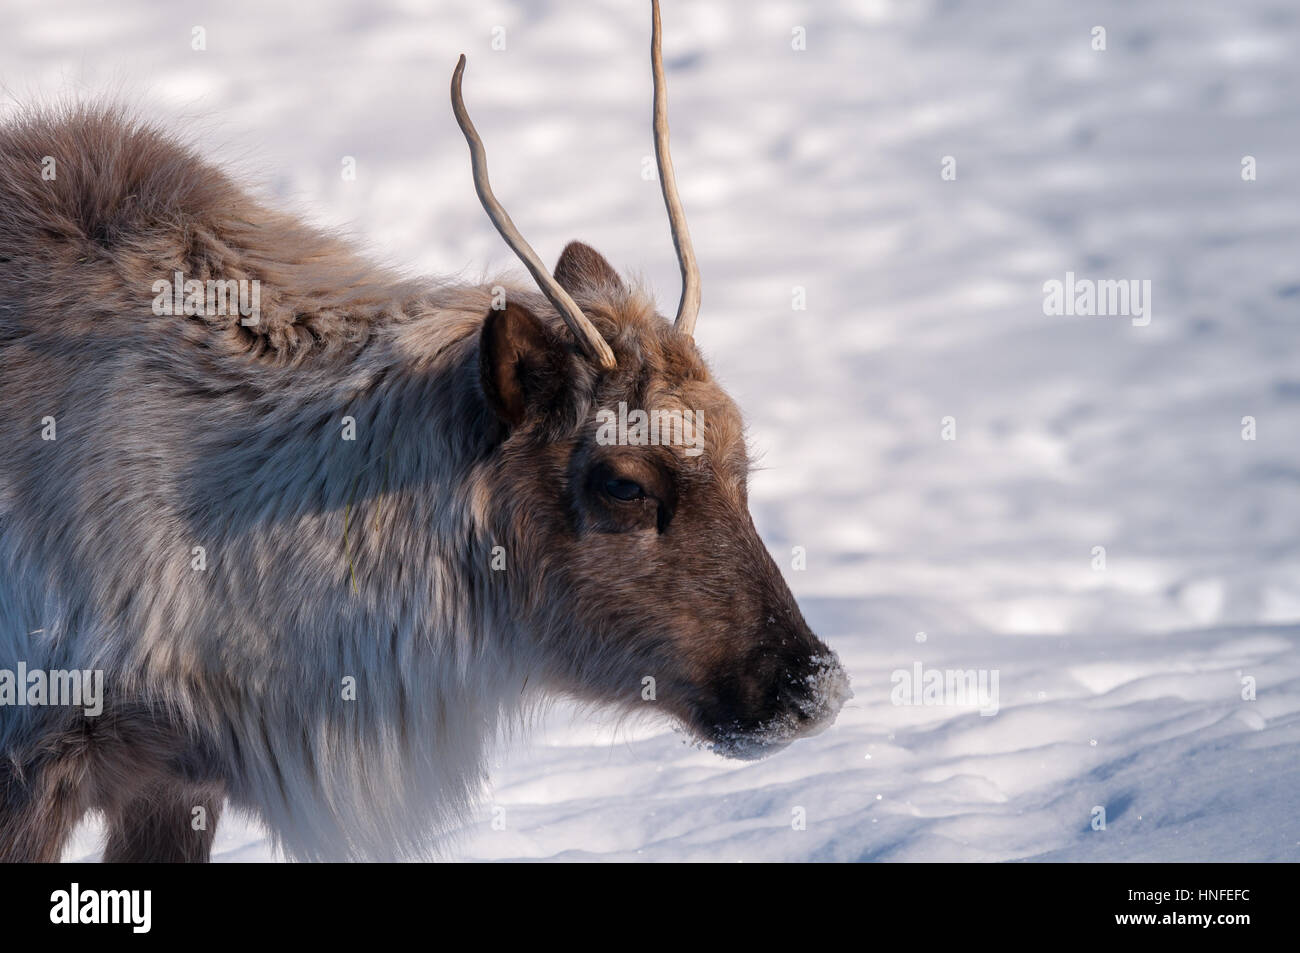 Caribou head close-up in winter. Stock Photo